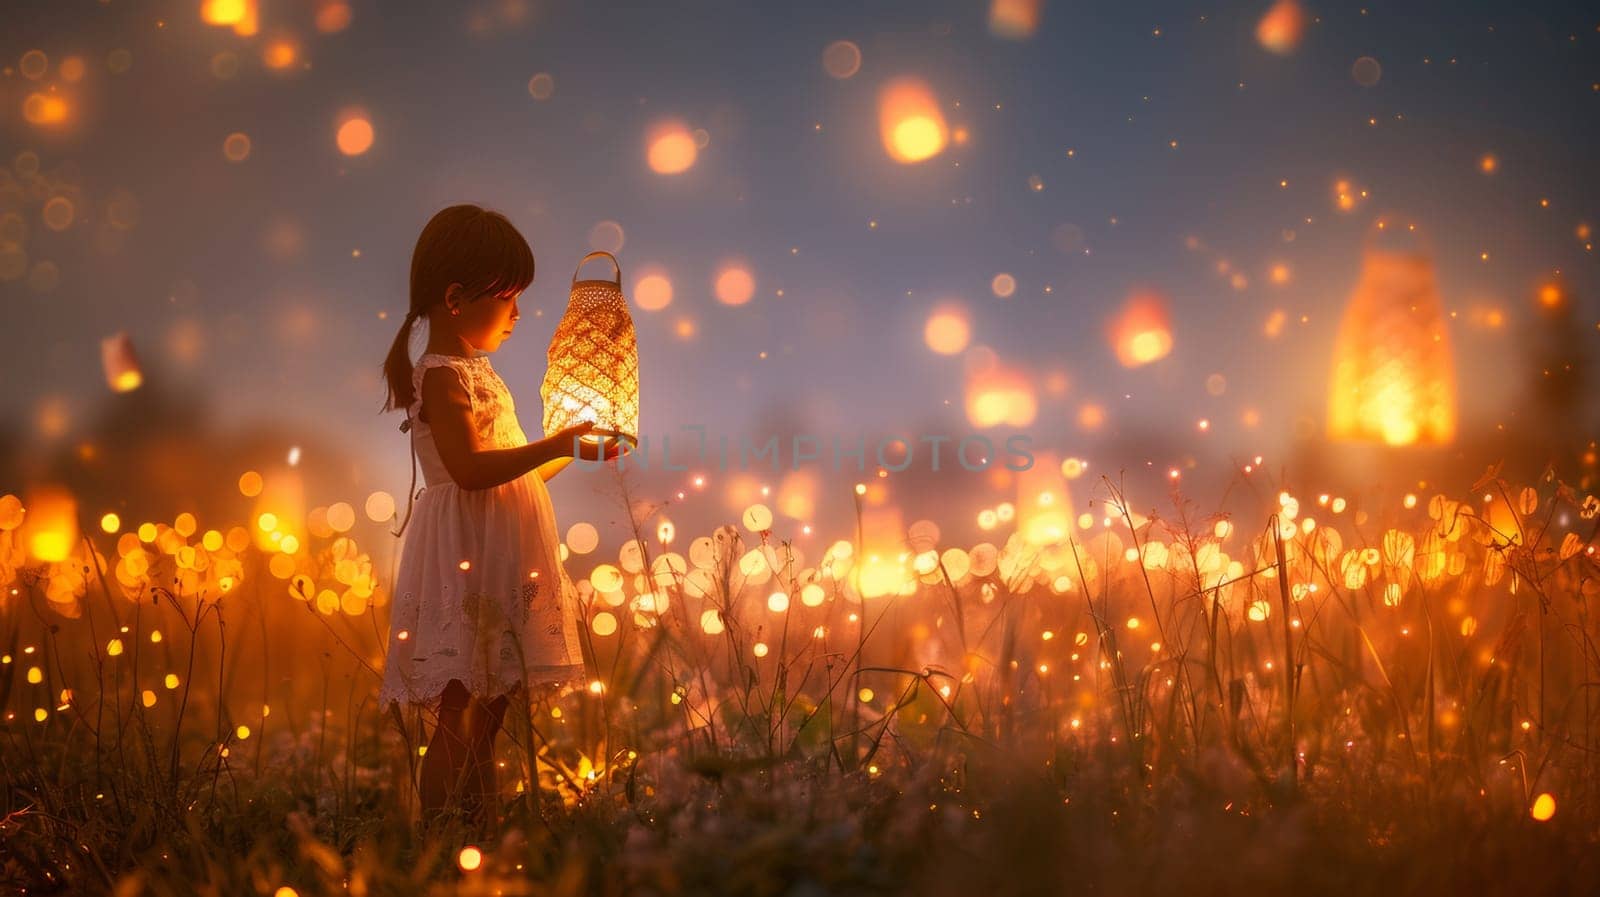 A little girl holding a lantern in the middle of grass